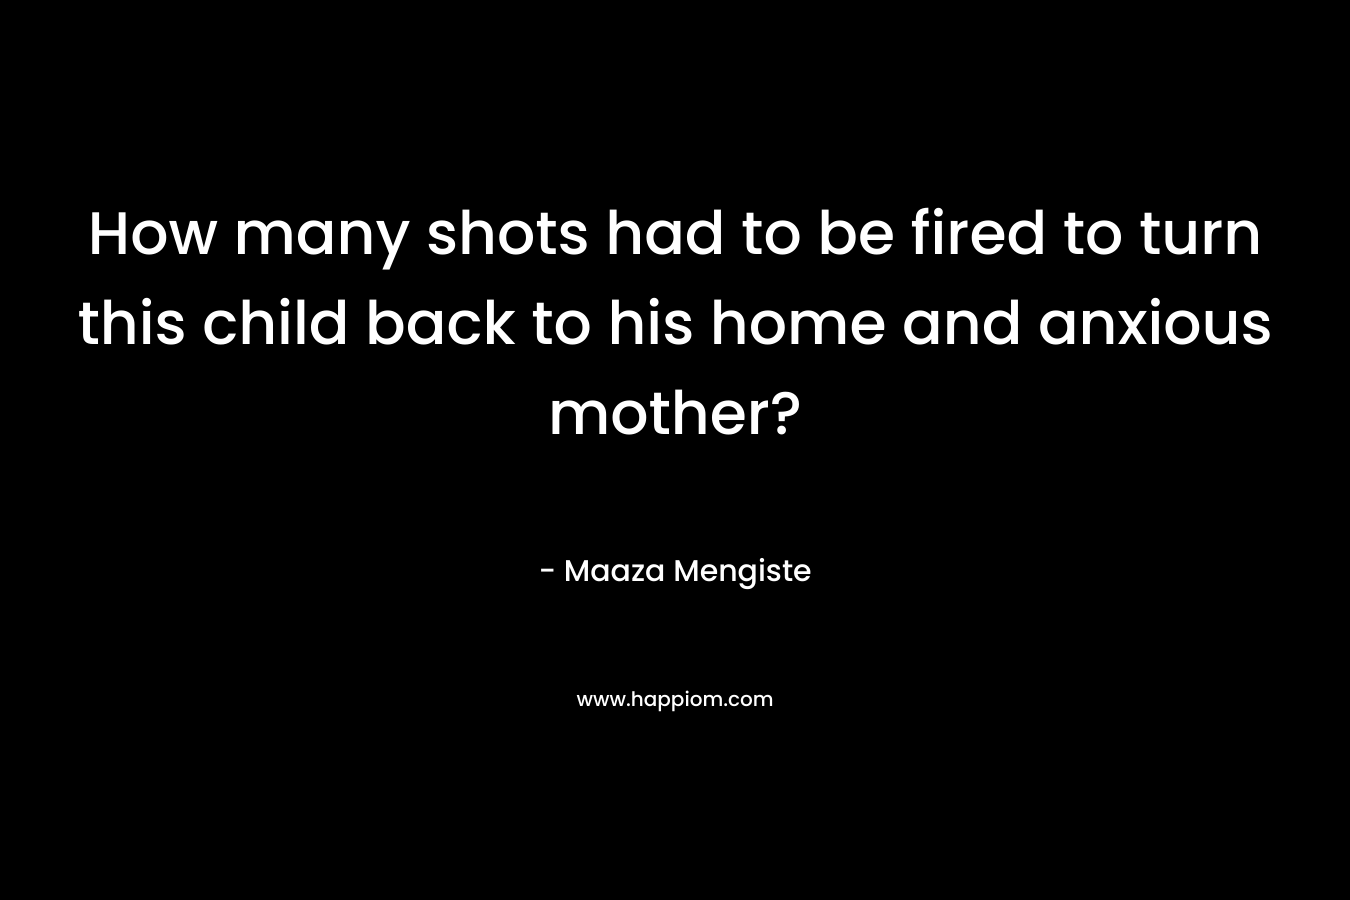 How many shots had to be fired to turn this child back to his home and anxious mother? – Maaza Mengiste